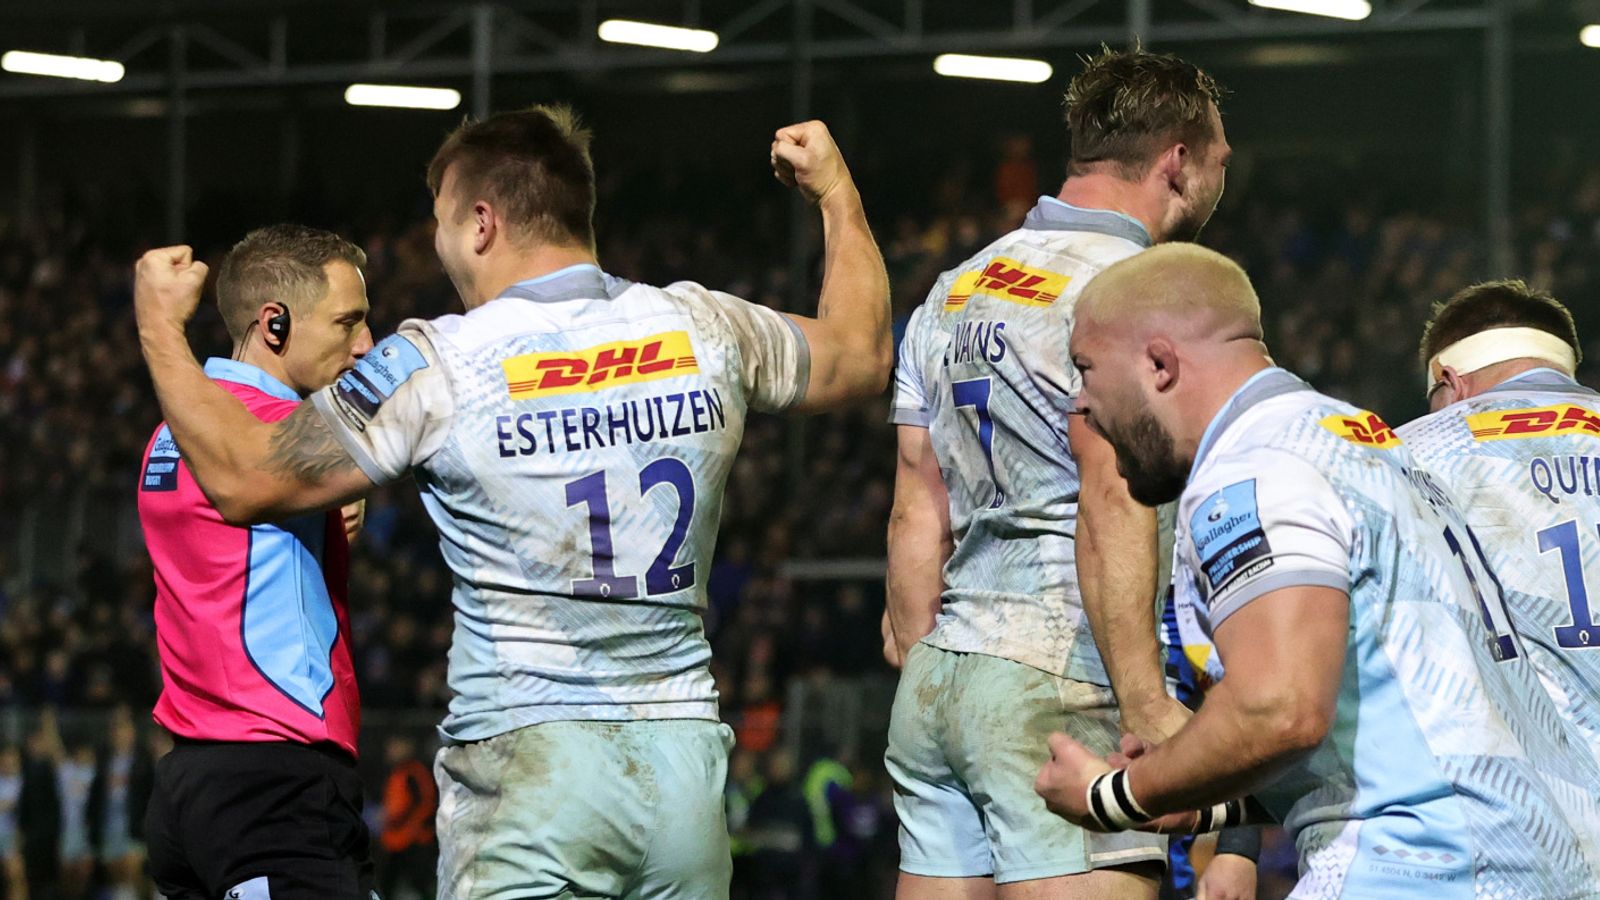 Gallagher Premiership – Bath 13-19 Harlequins: Quins pick up fourth victory in the row with win at The Rec